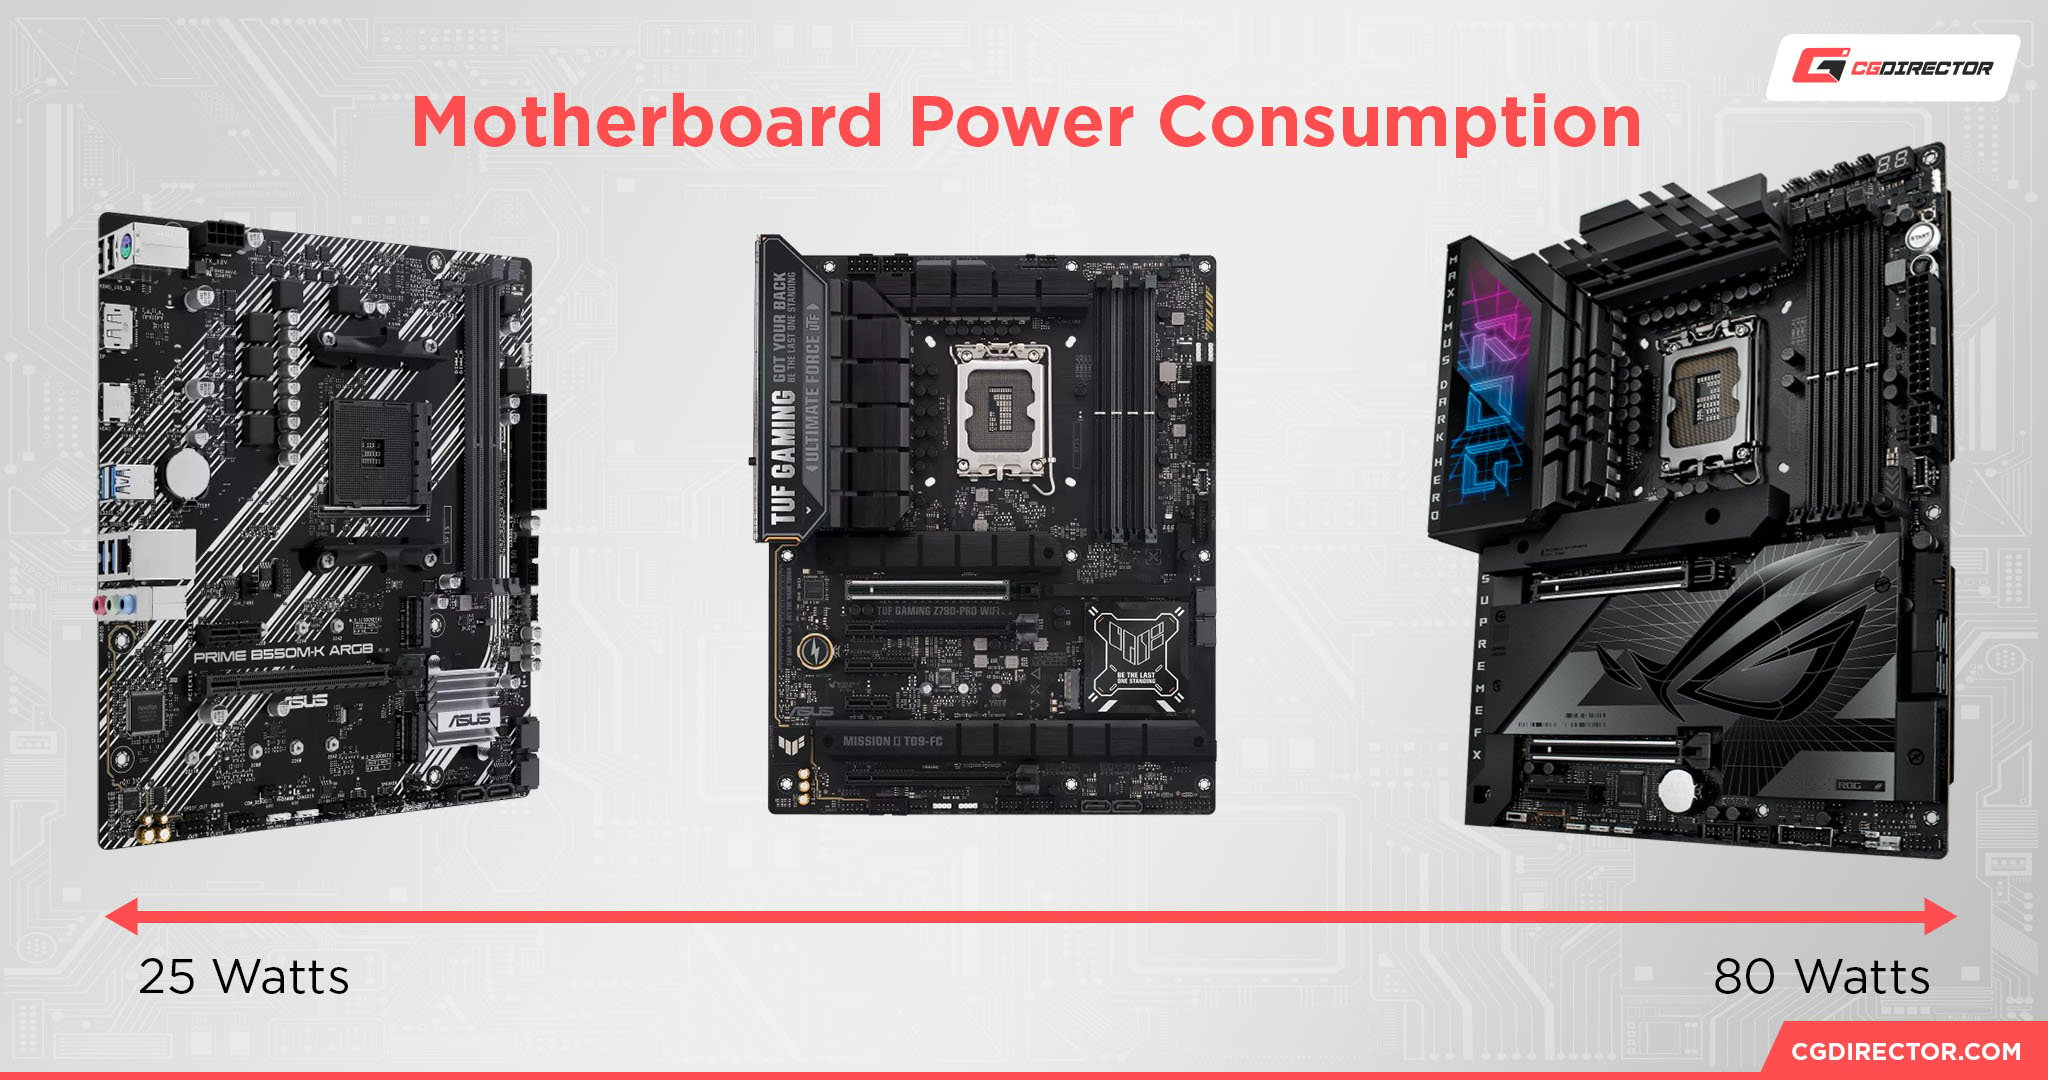 Motherboard Power Consumption